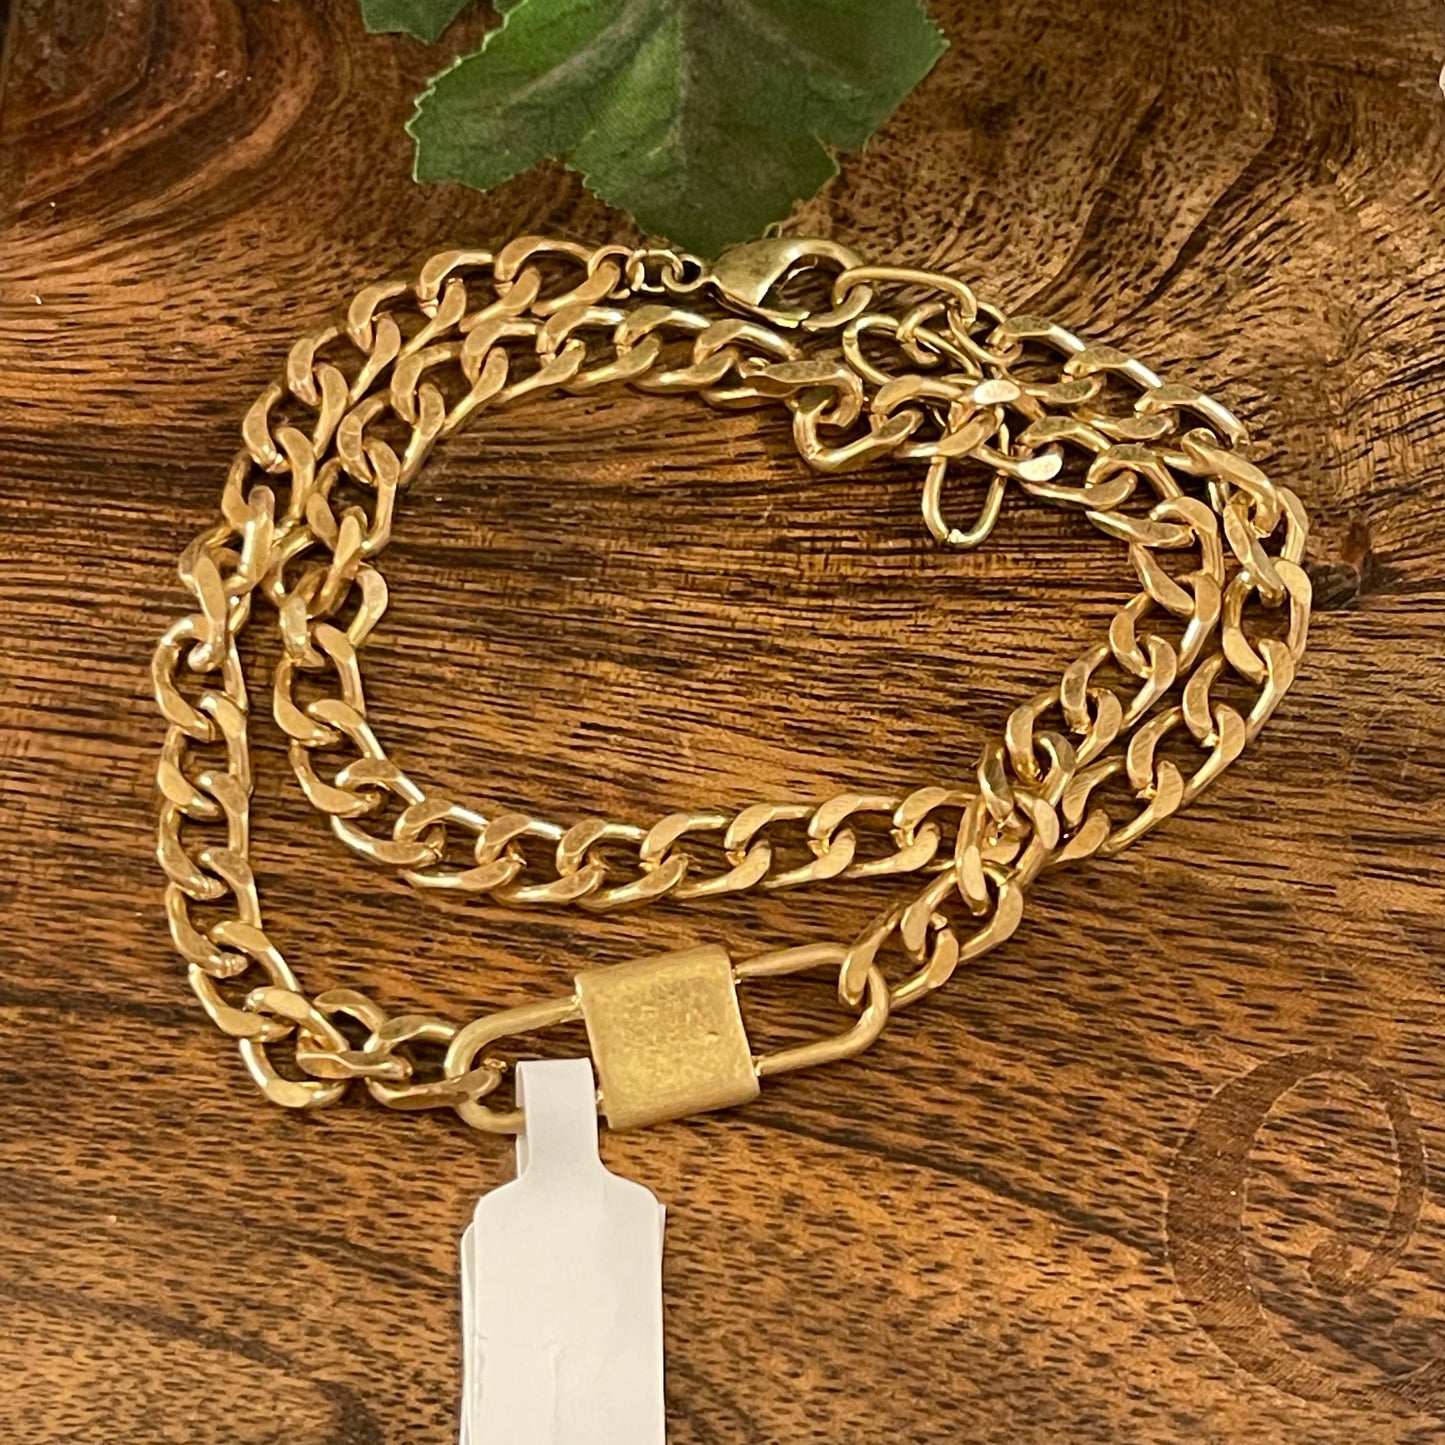 Gold Chain Link Wrap Bracelet With Claw Closure